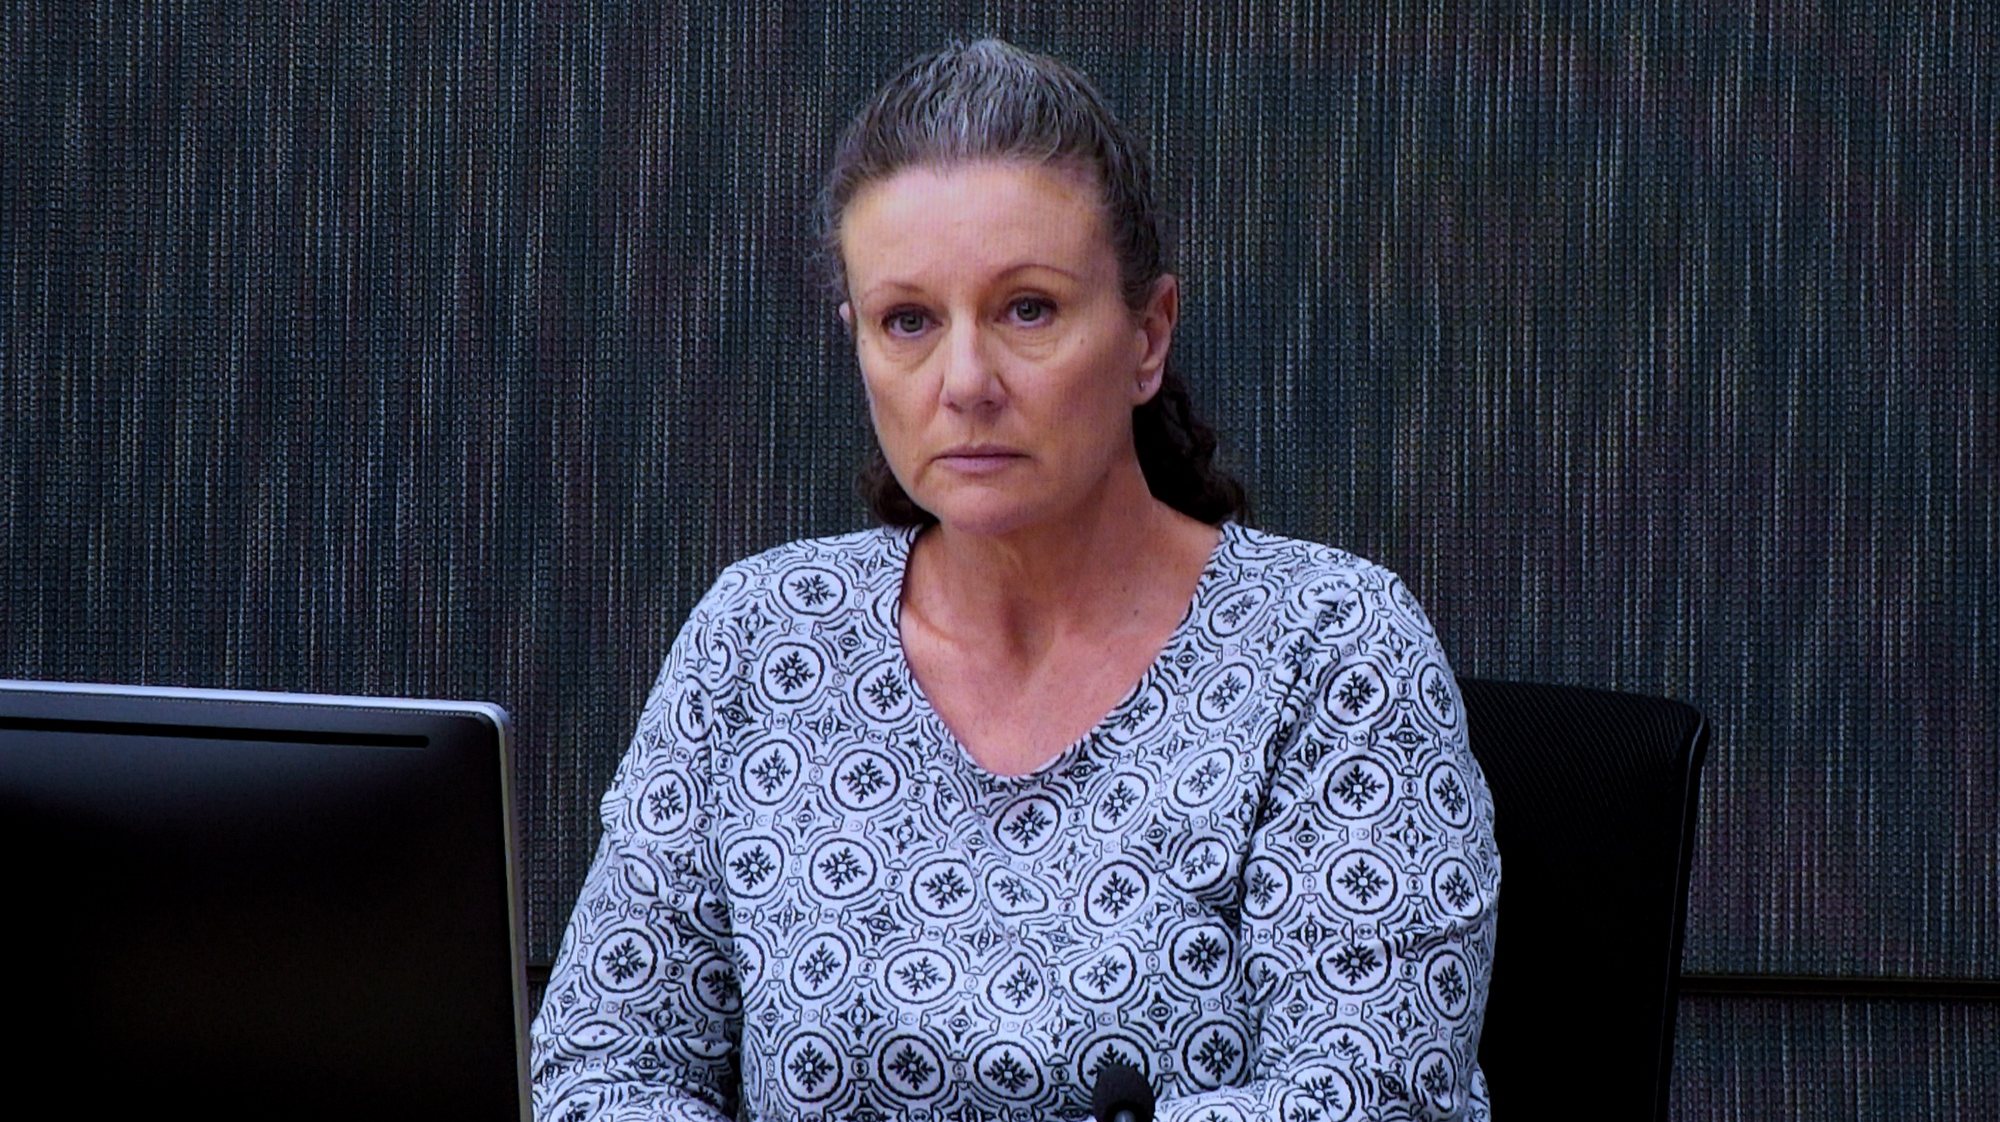 epa07539288 Kathleen Folbigg appears via video link during a convictions inquiry at the NSW Coroners Court, in Sydney, New South Wales, Australia, 01 May 2019. An Inquiry continues into convictions of &#039;baby killer&#039; Kathleen Megan Folbigg, who was imprisoned for at least 25 years in October 2003 after being found guilty of killing her four infant children.  EPA/JOEL CARRETT  AUSTRALIA AND NEW ZEALAND OUT